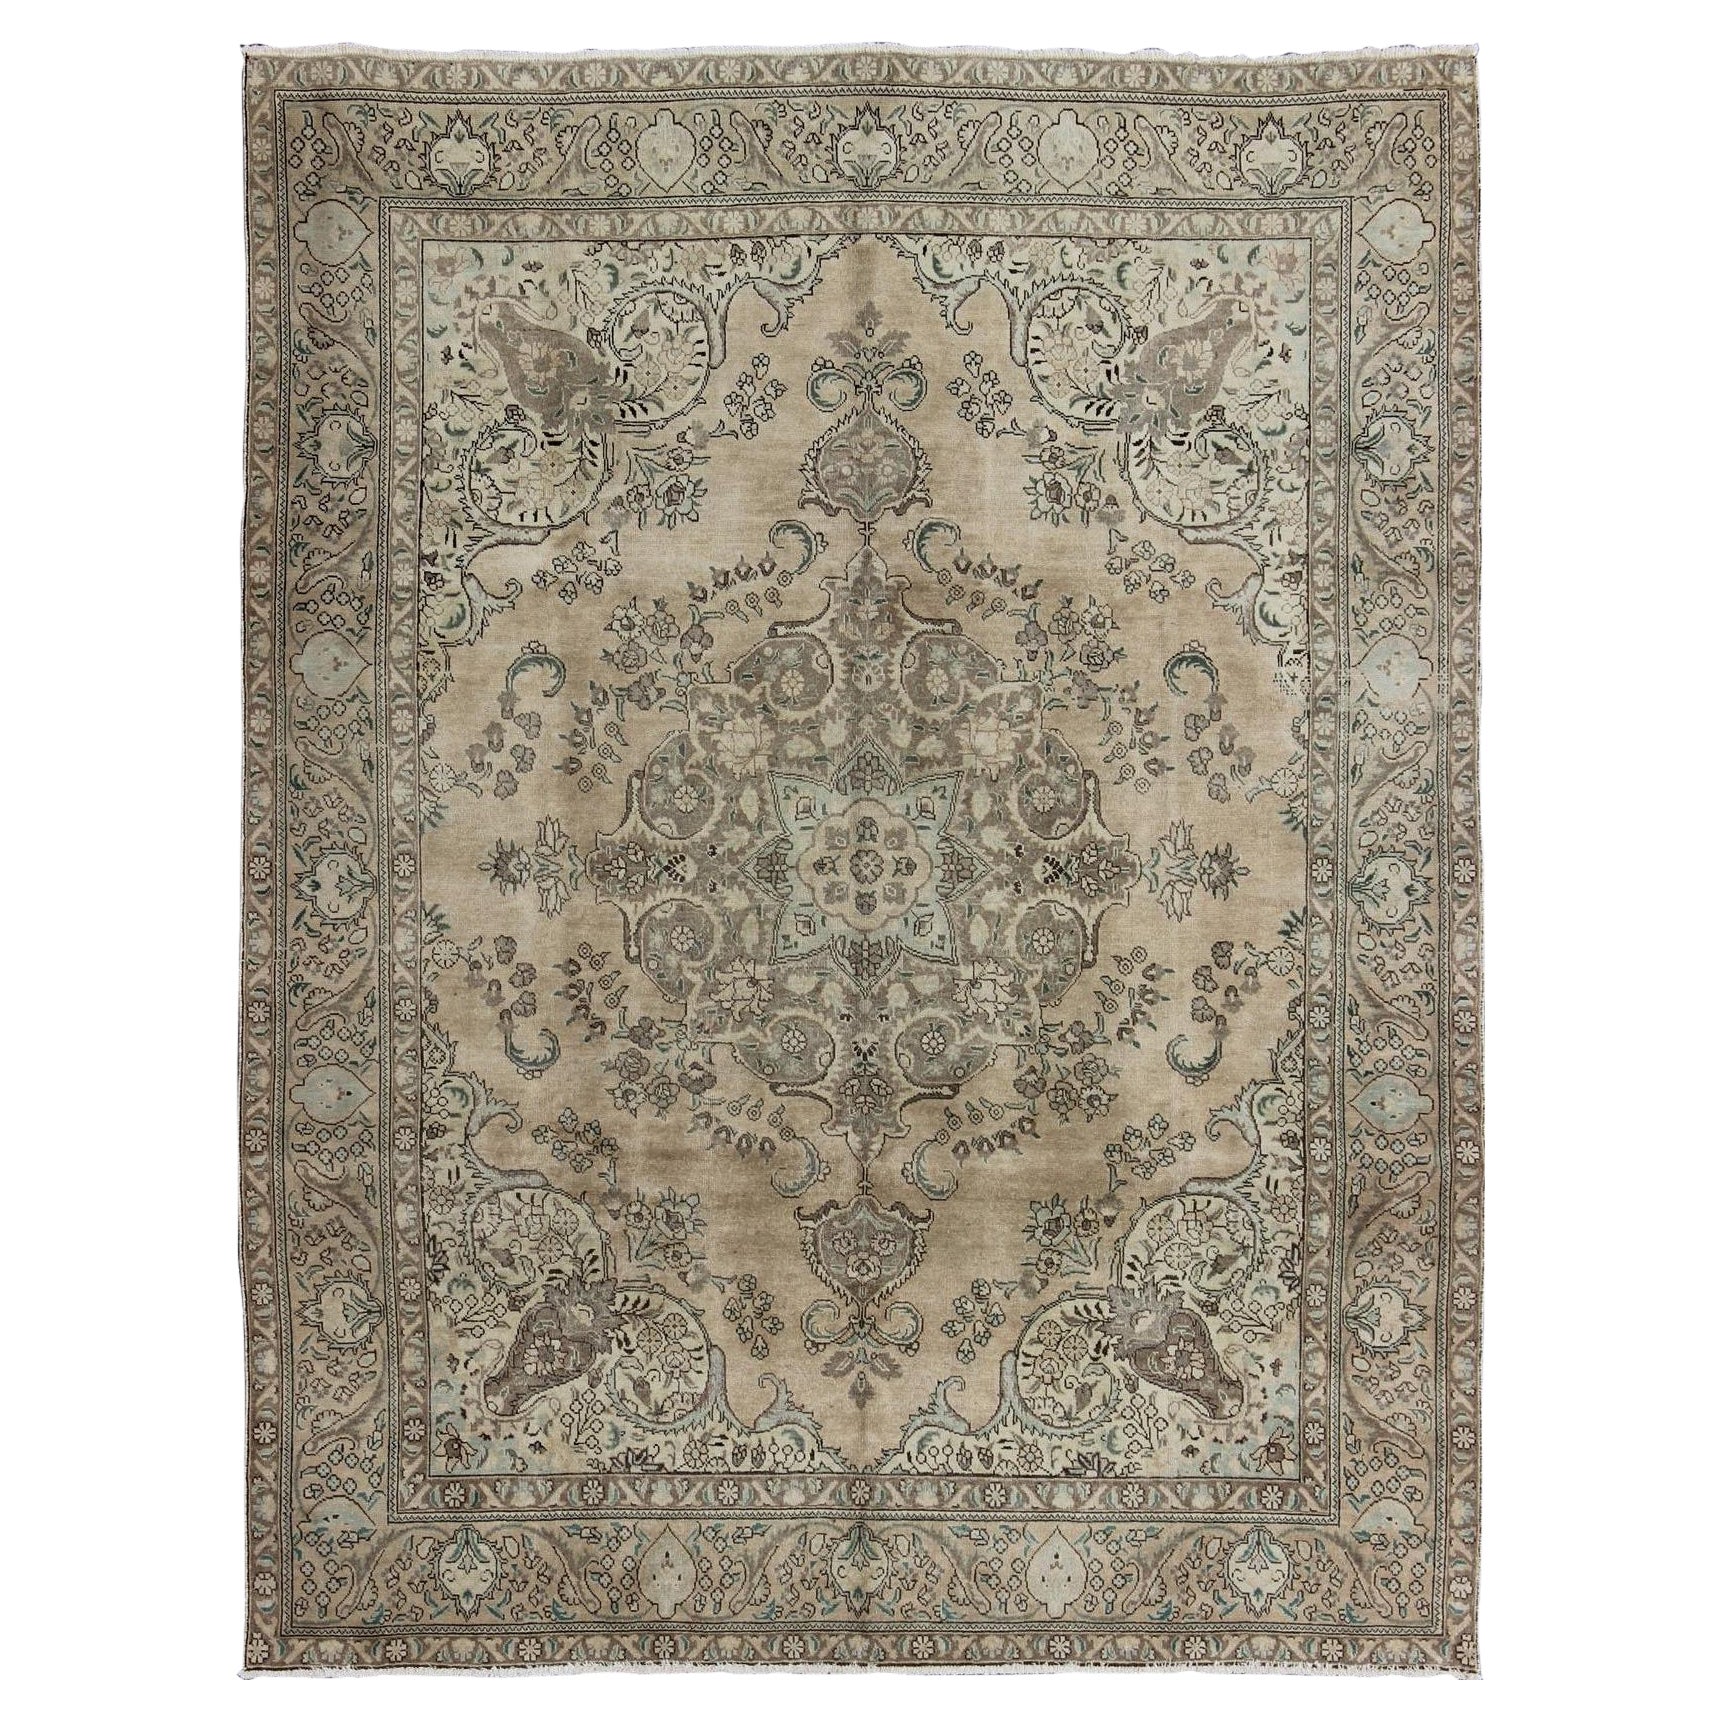 Vintage Muted Persian Tabriz Rug With Large Floral Medallion in Earthy Tones For Sale